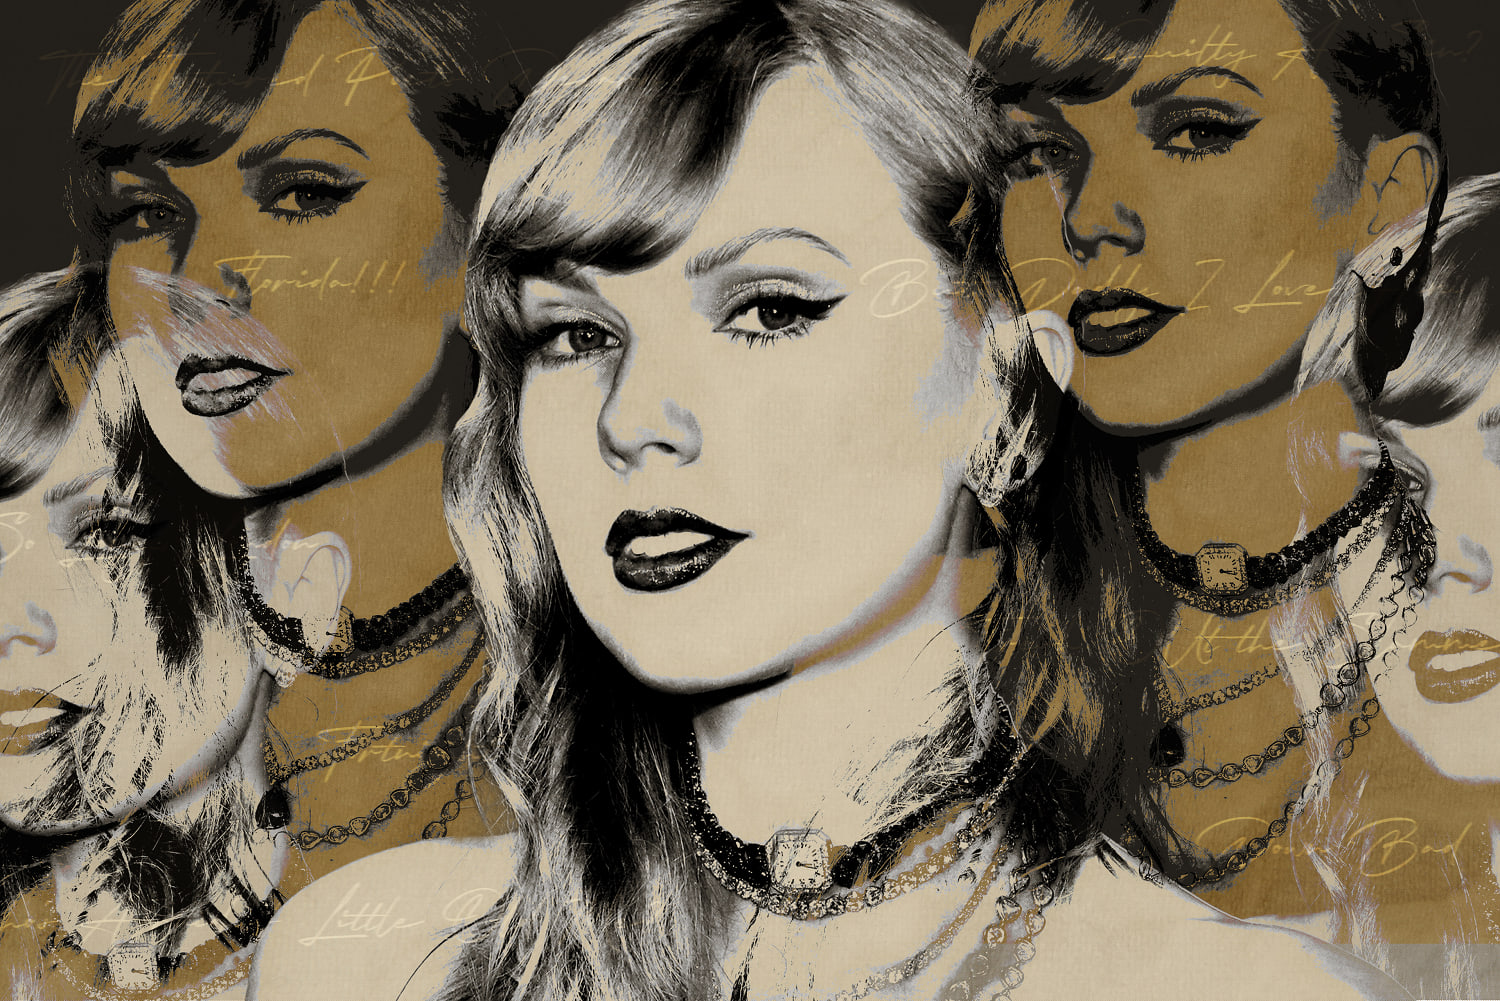 Swifties praise 'The Tortured Poets Department' as it blasts to the top of U.S. charts